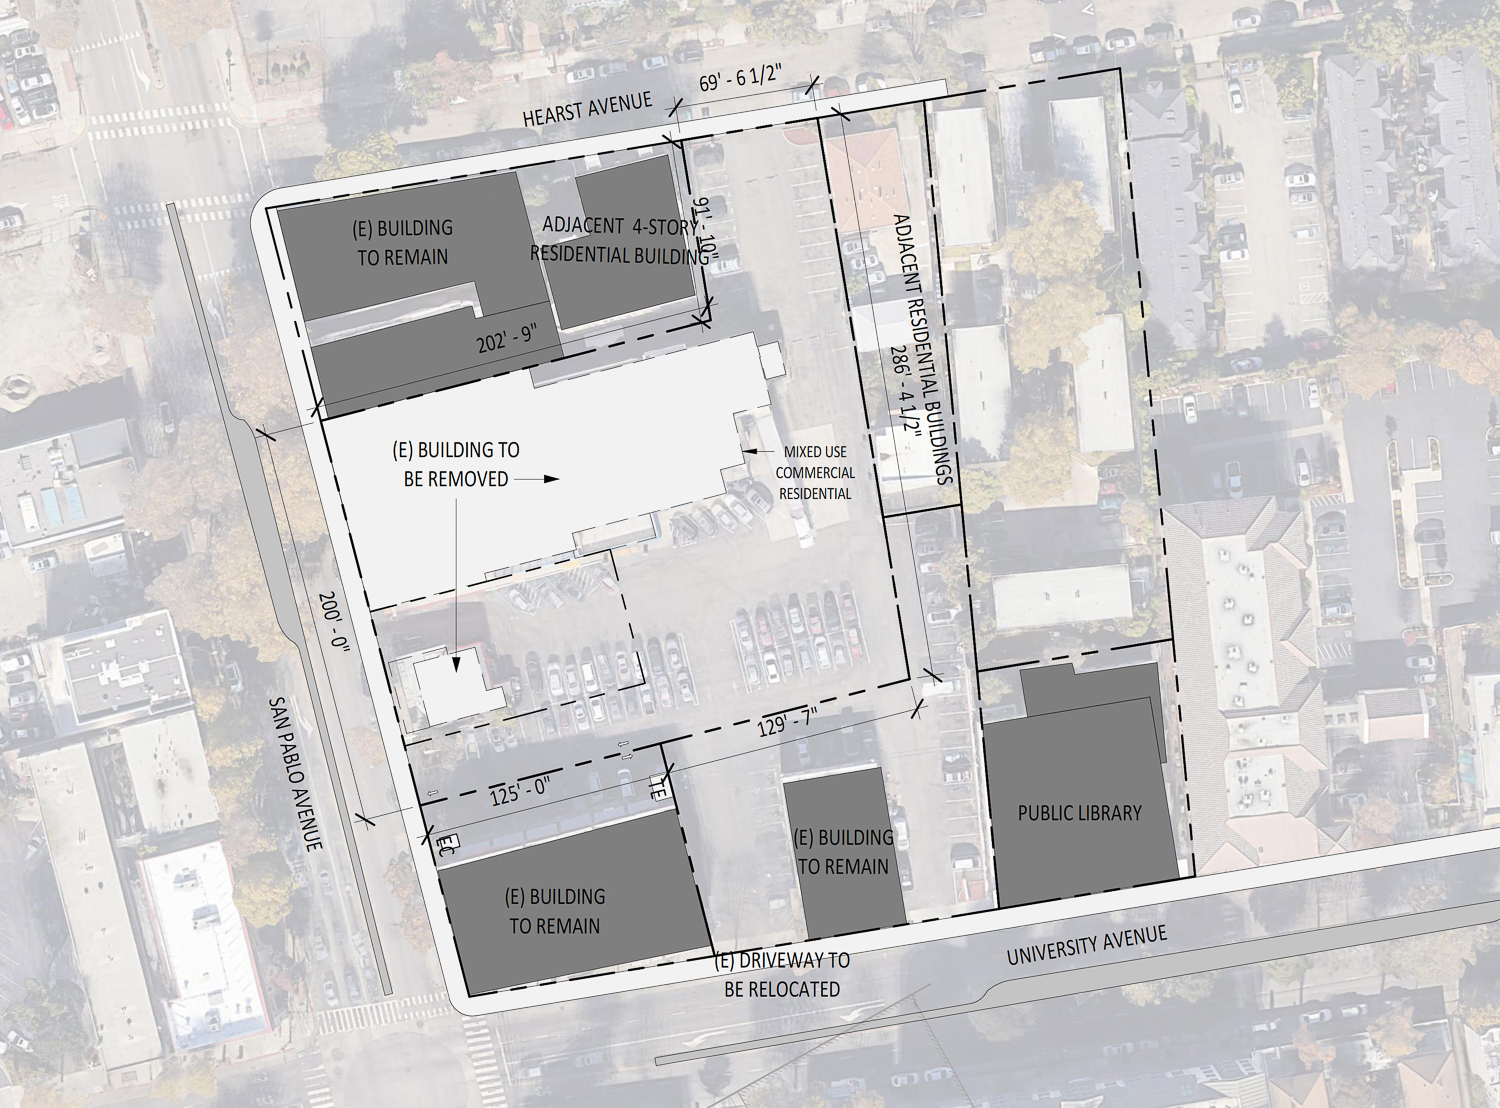 1931-1941 San Pablo Avenue site map with the two buildings to be demolished labeled, massing by Lowney Architects